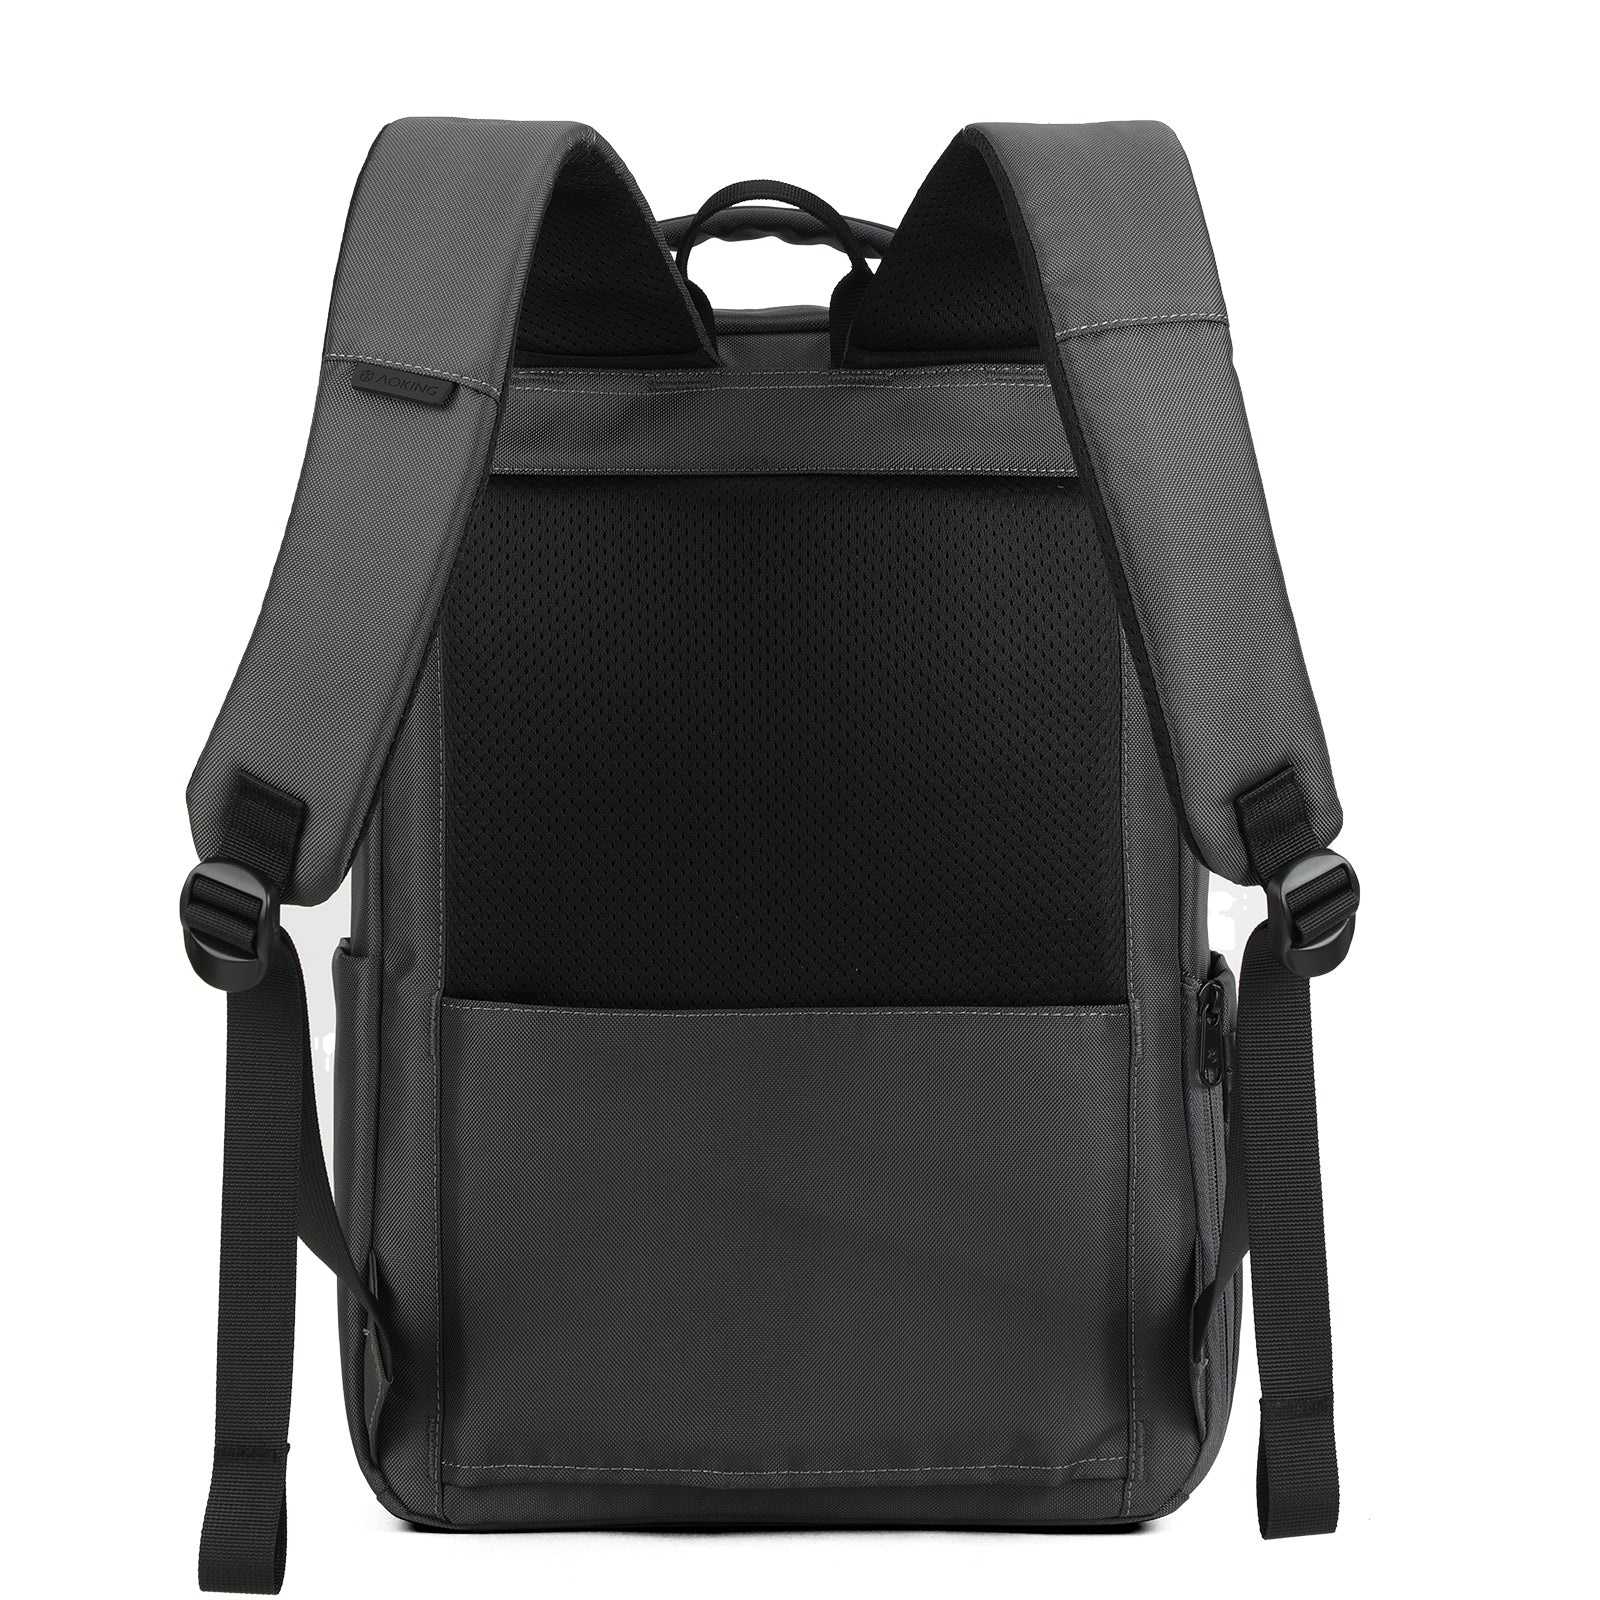 Aoking Business Laptop Backpack SNX6082 Grey